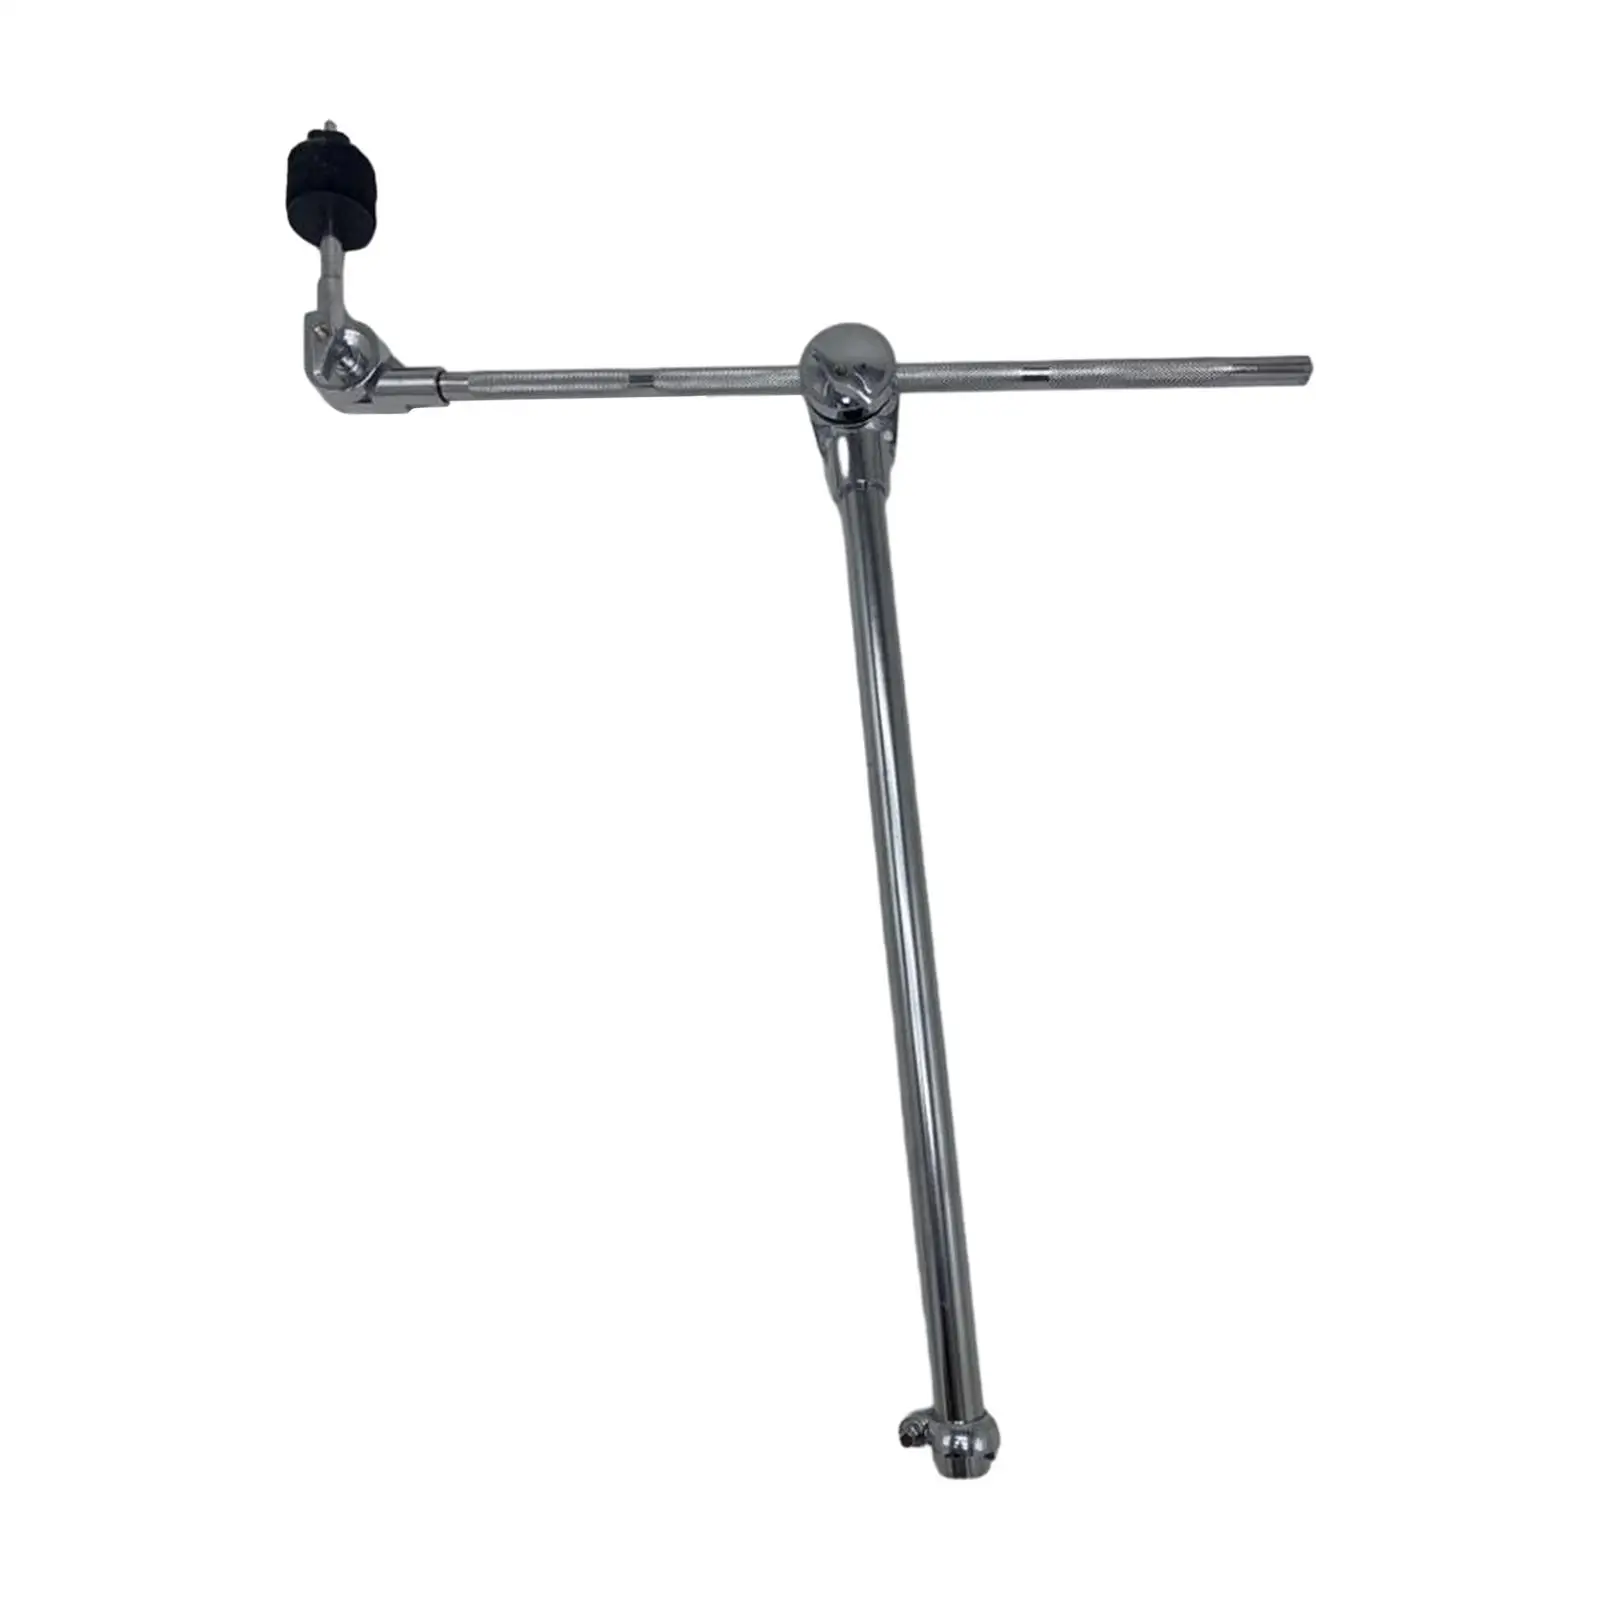 Cymbal Tilter Drum Accessory Extension Attachment Portable Cymbal Arm Stand Holder for Percussion Accessories Musical Instrument